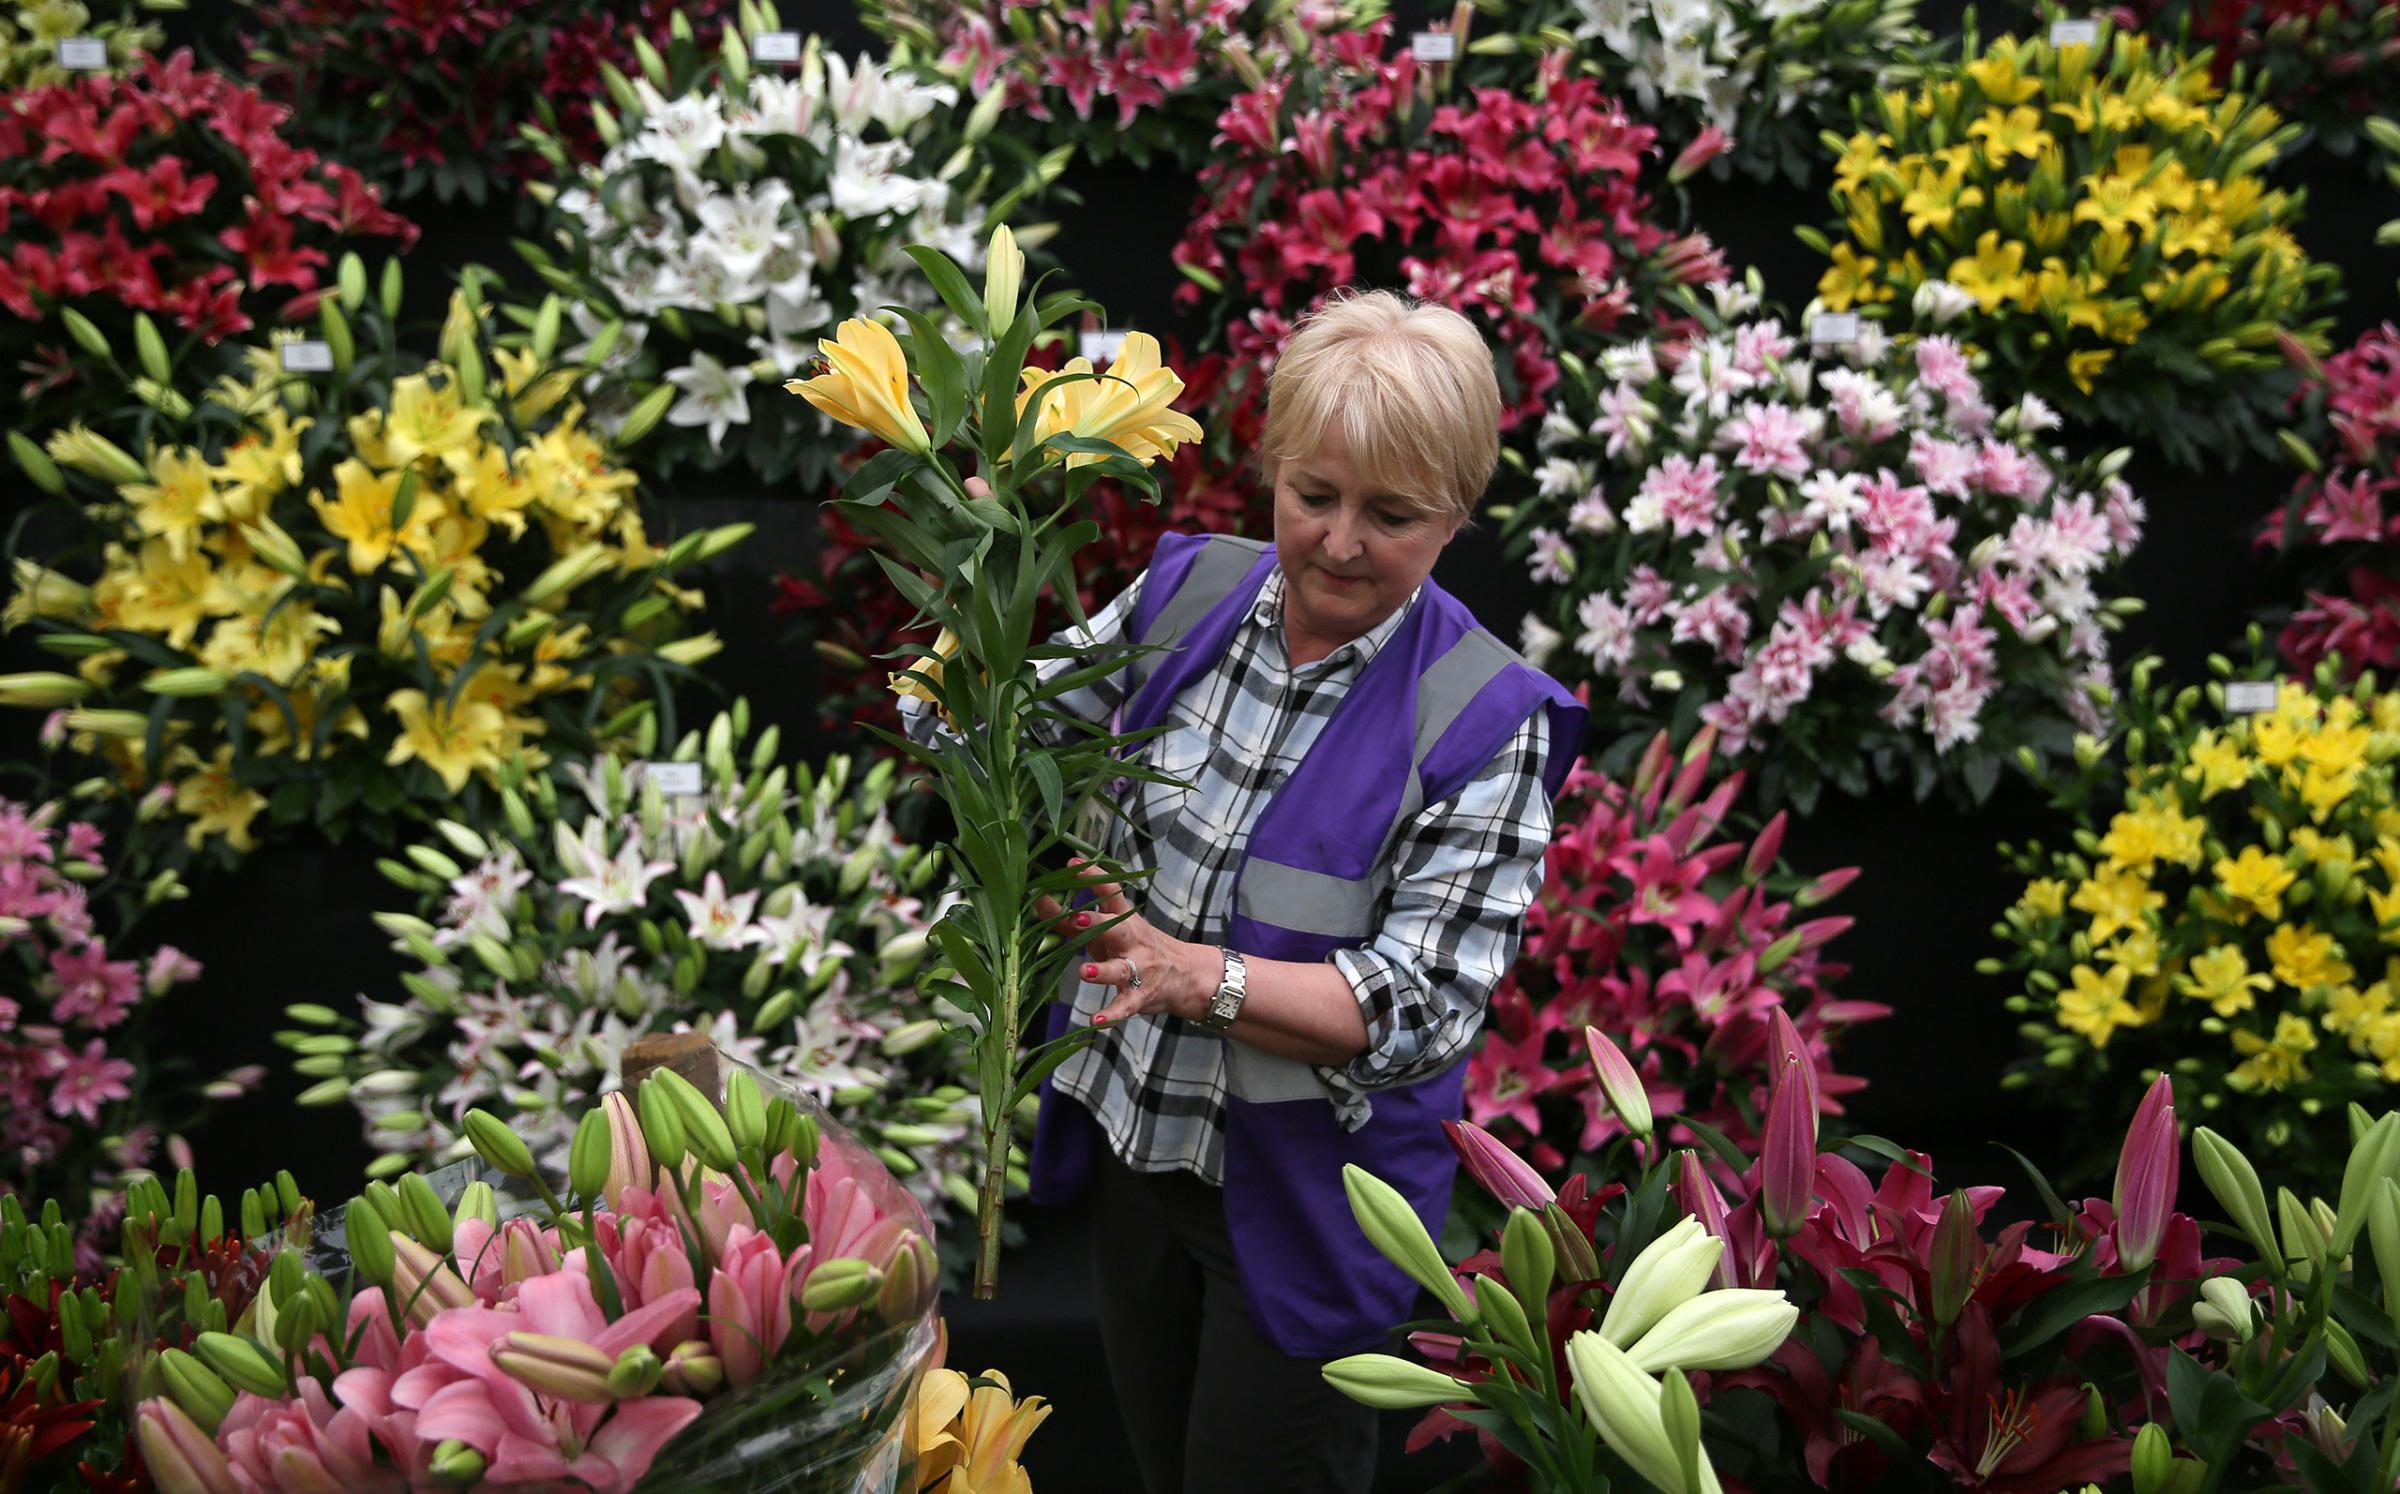 A woman arranges a display of lillies during preparations for the RHS Chelsea Flower Show in London